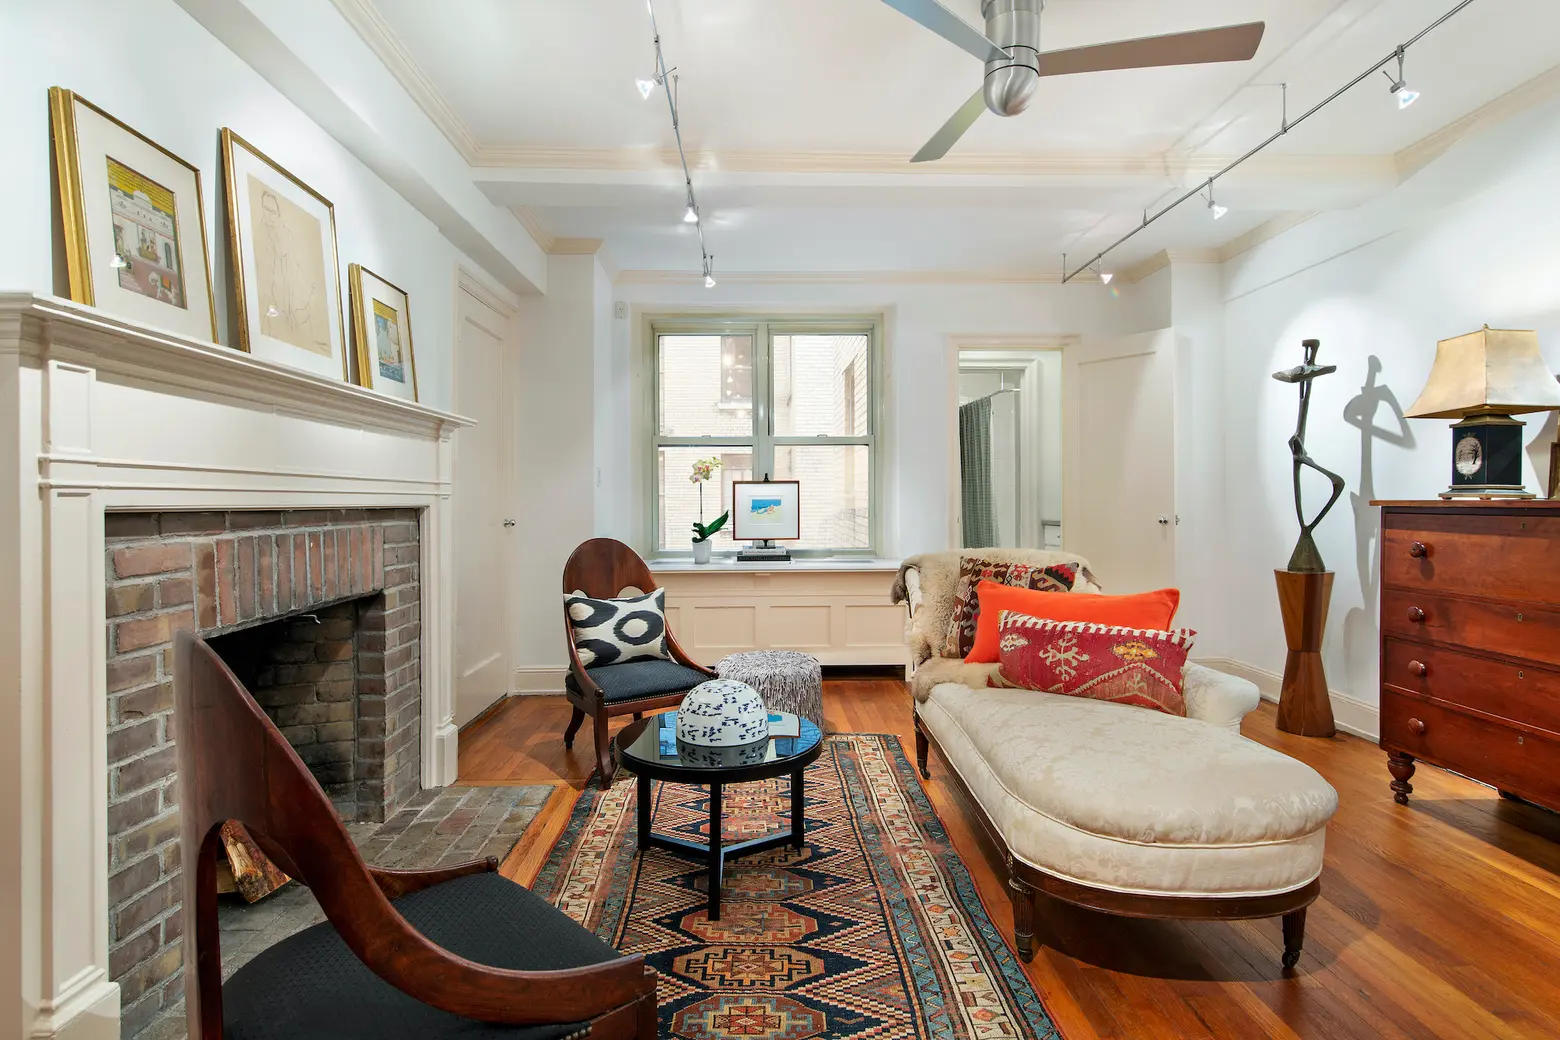 For $349K, this Beekman studio is a tiny charmer